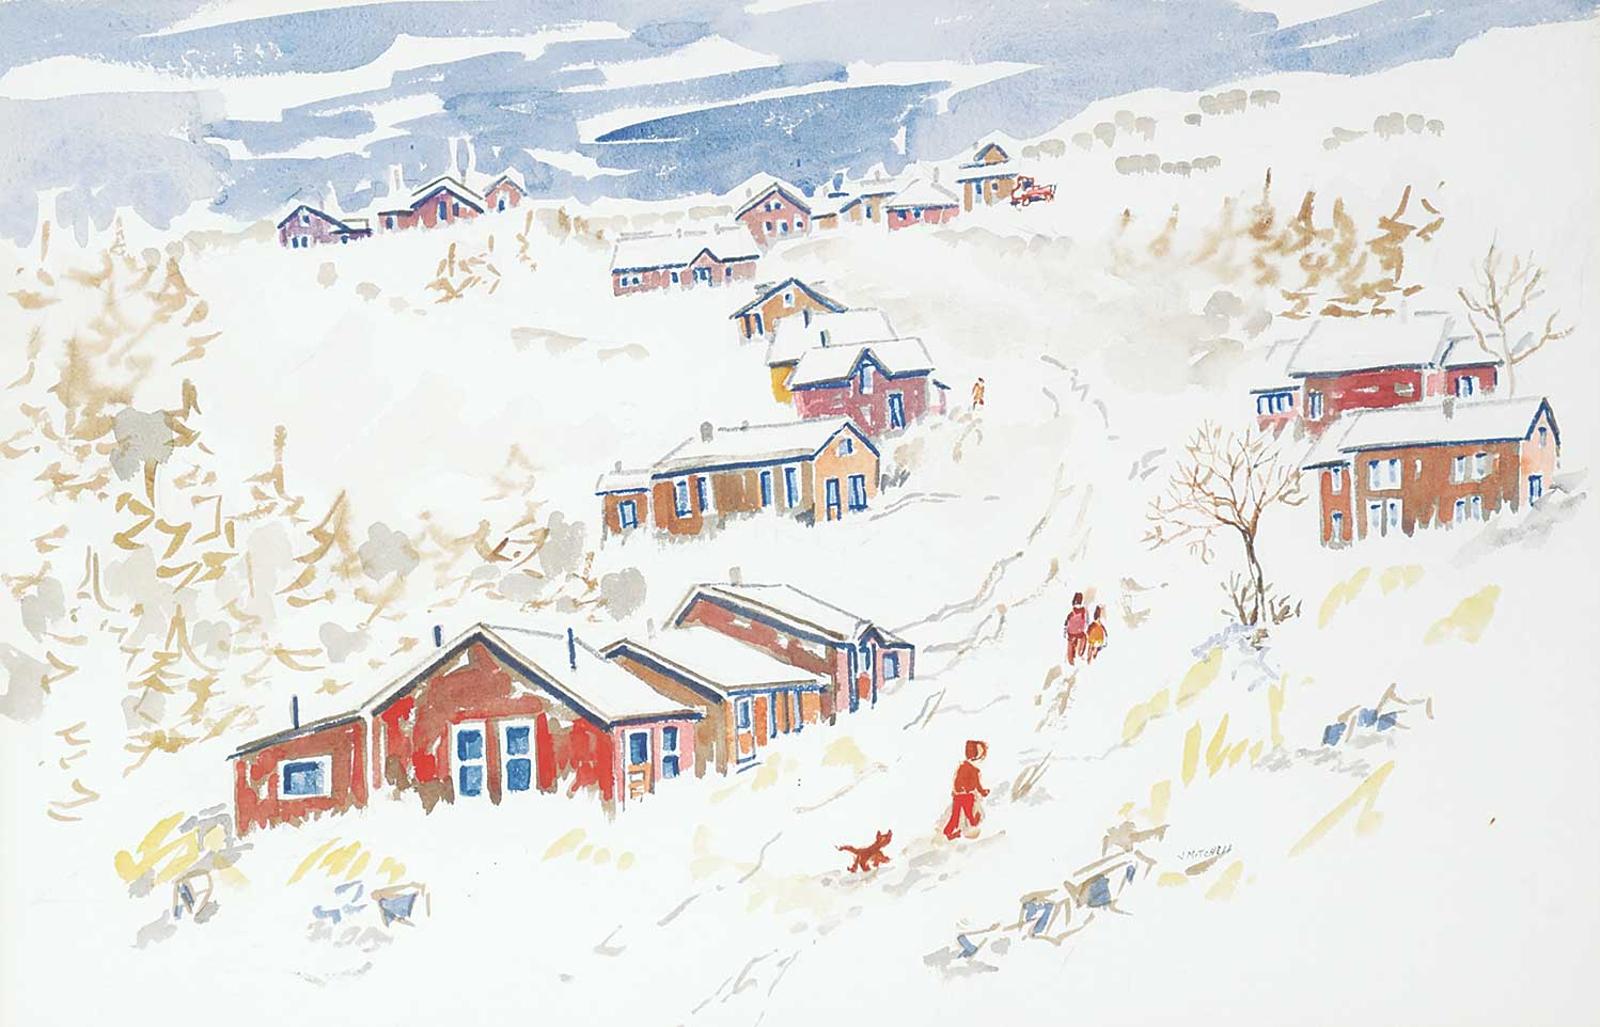 Janet Mitchell (1915-1998) - Untitled - Walking Home After School